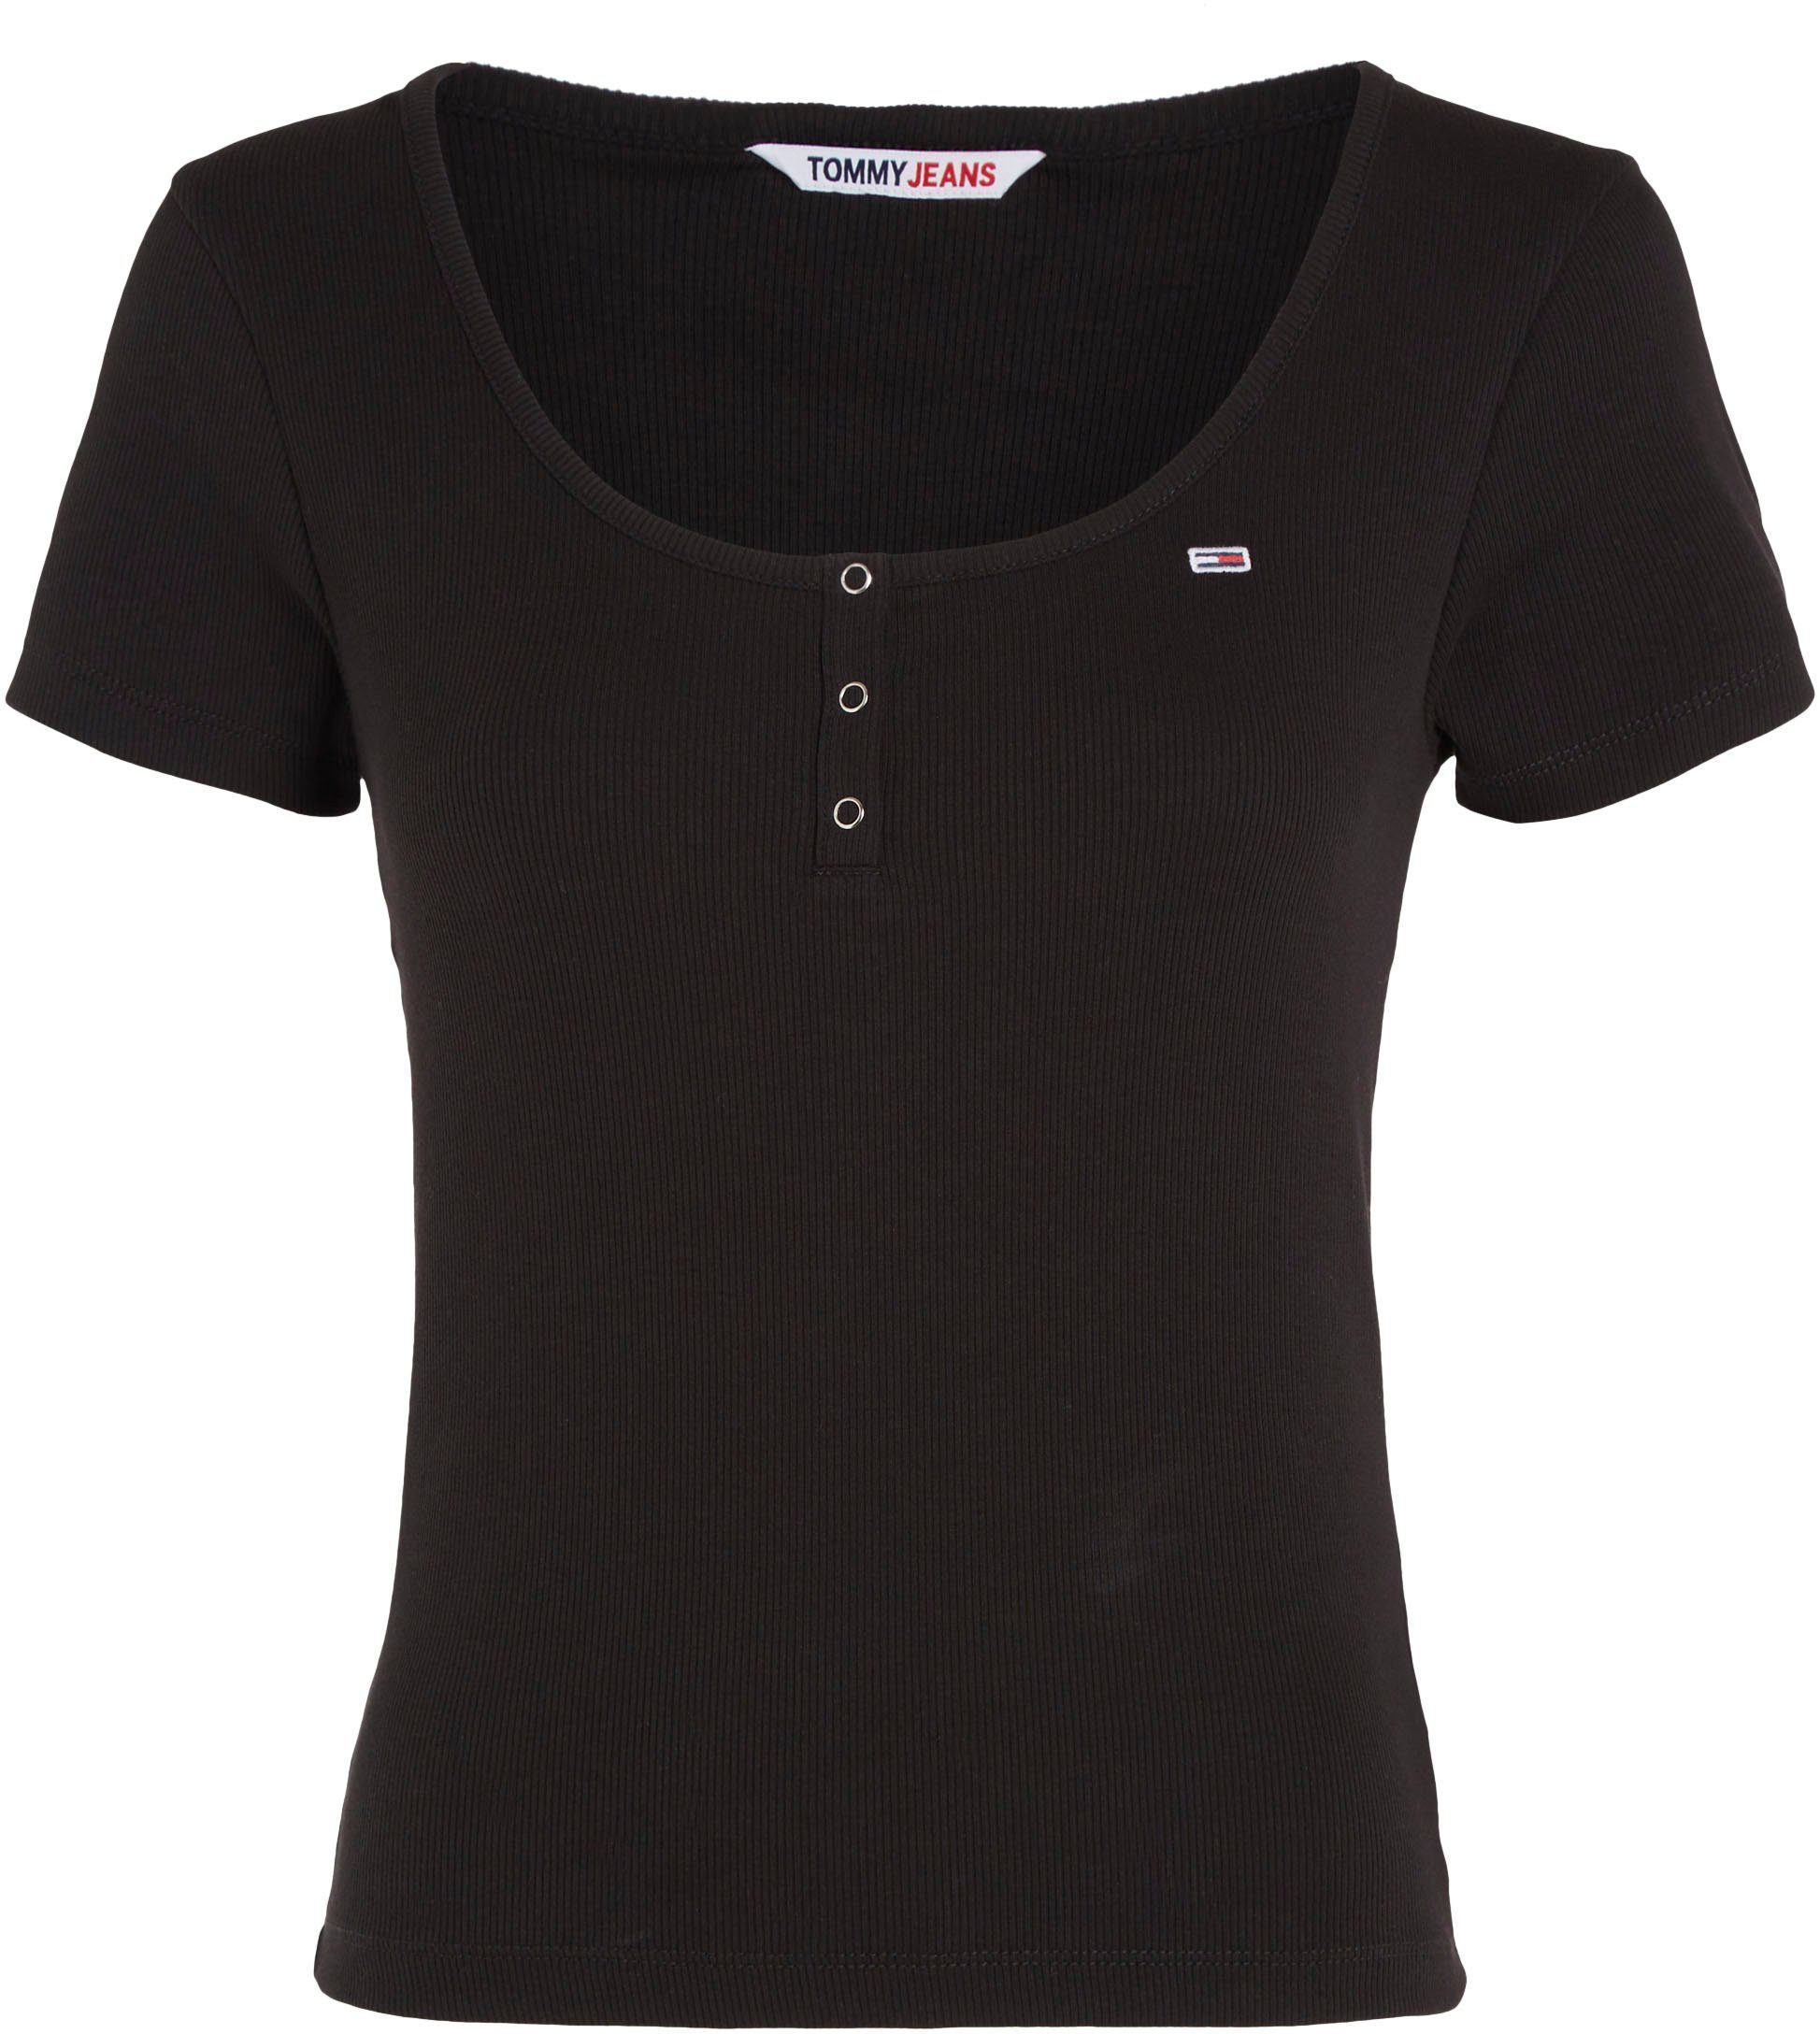 Tommy Jeans T-Shirt TJW BBY Black BUTTON mit Logostickerei Jeans C-NECK Tommy RIB